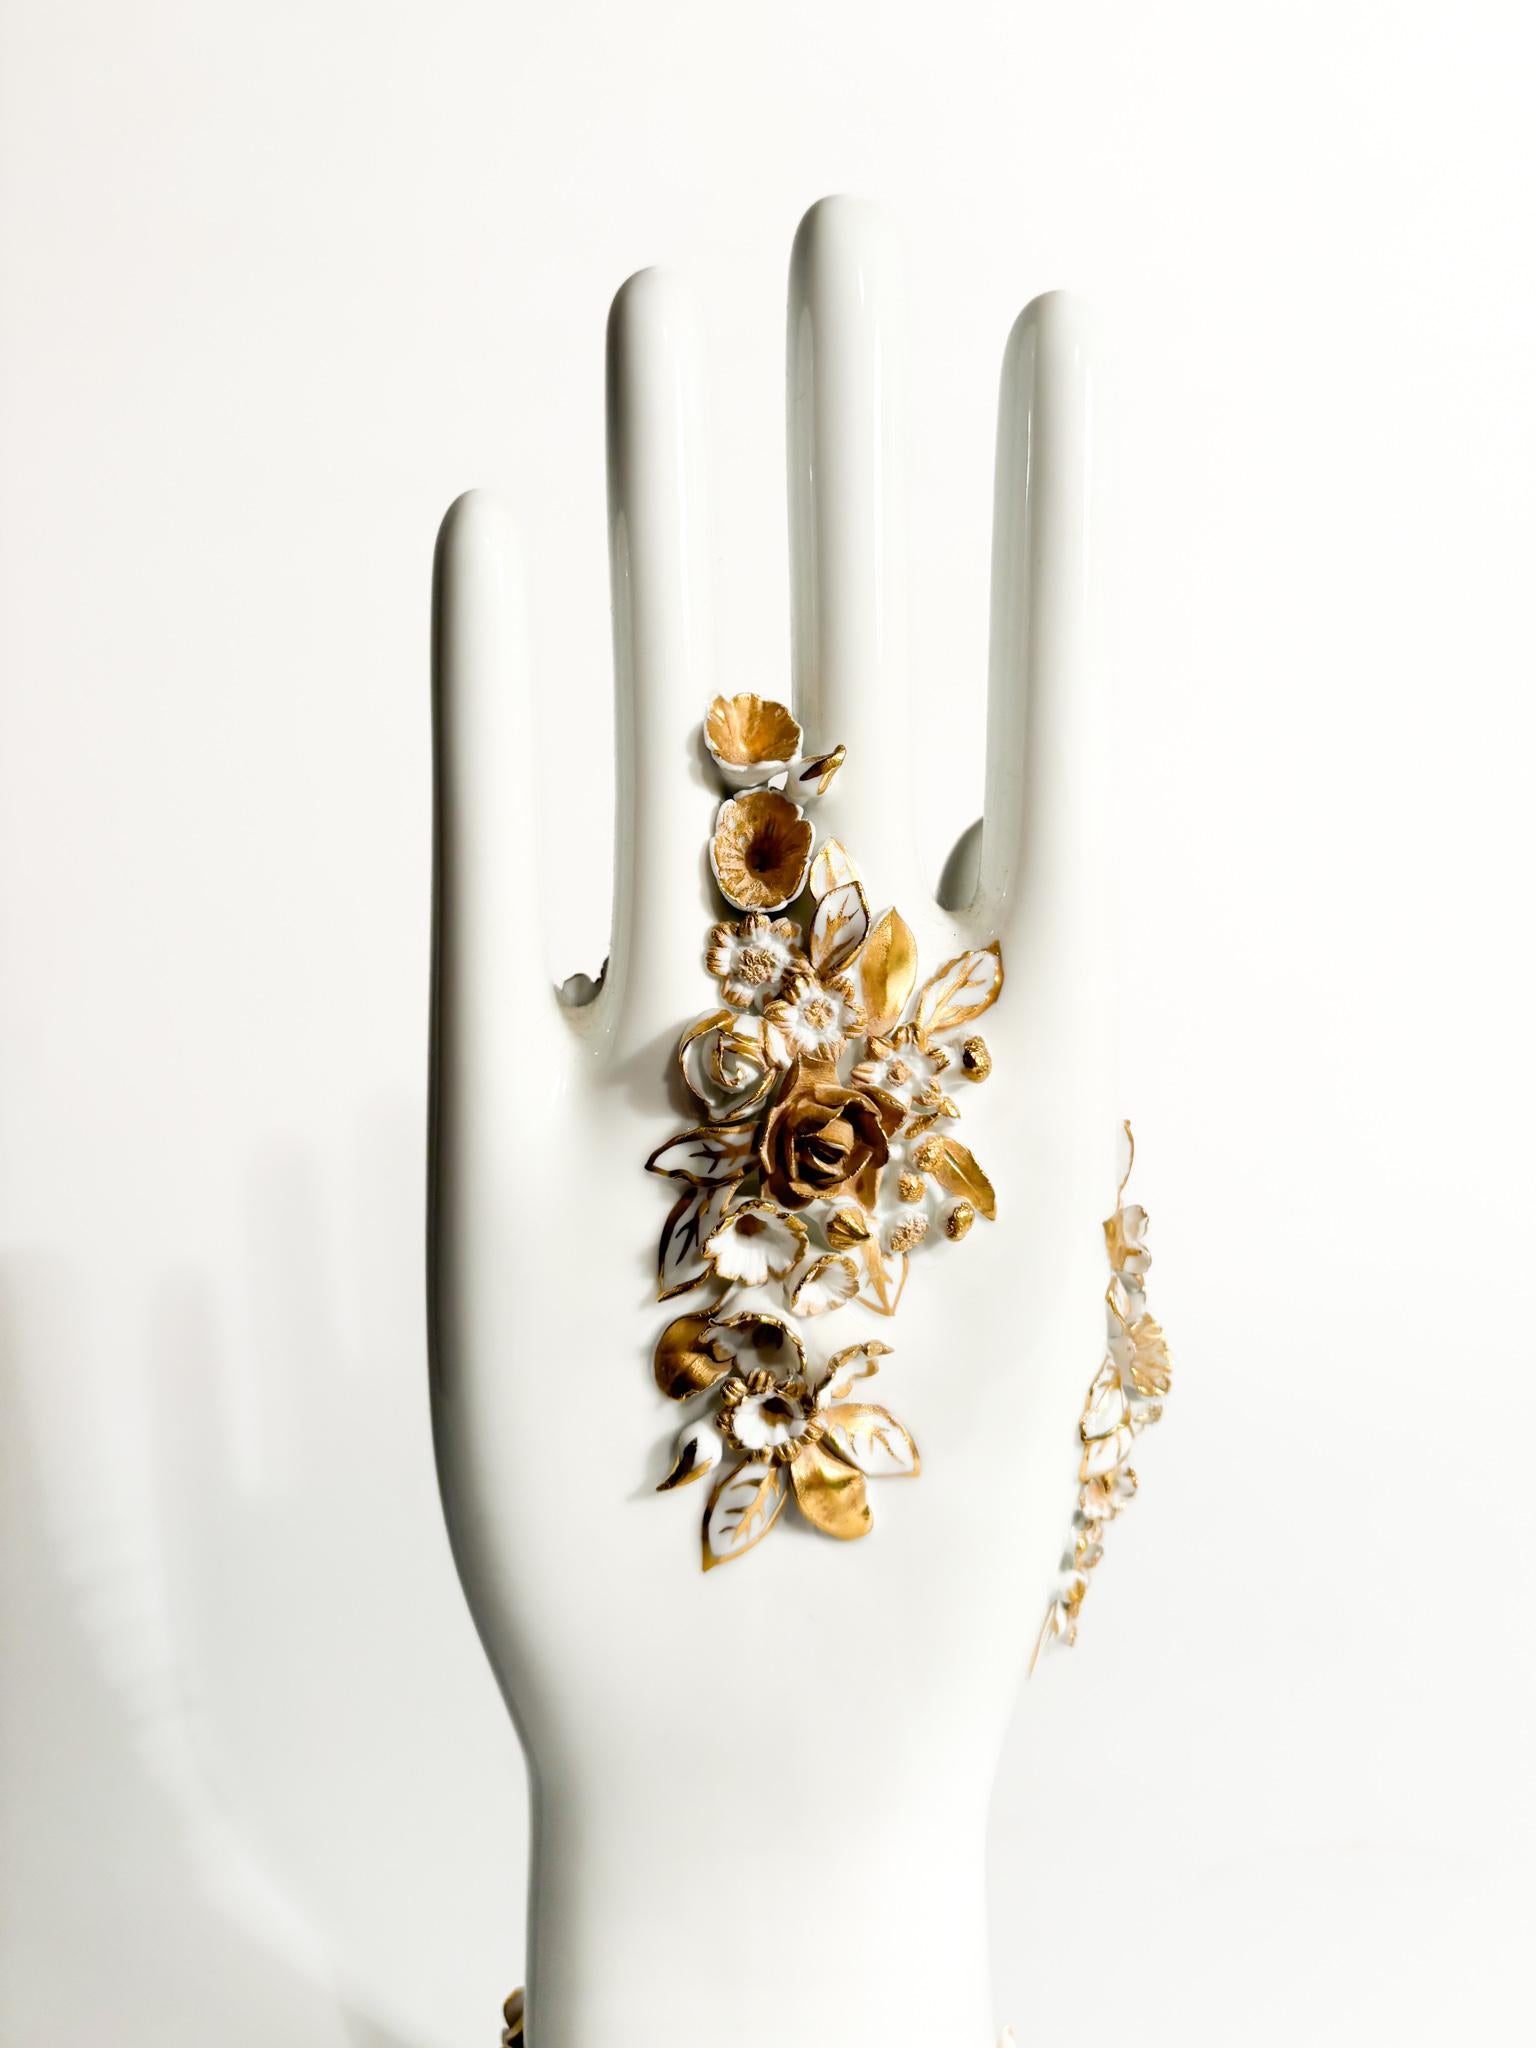 Ponti White and Gold Flowered Hand Art by Gio Ponti for Richard Ginori 1980s For Sale 5